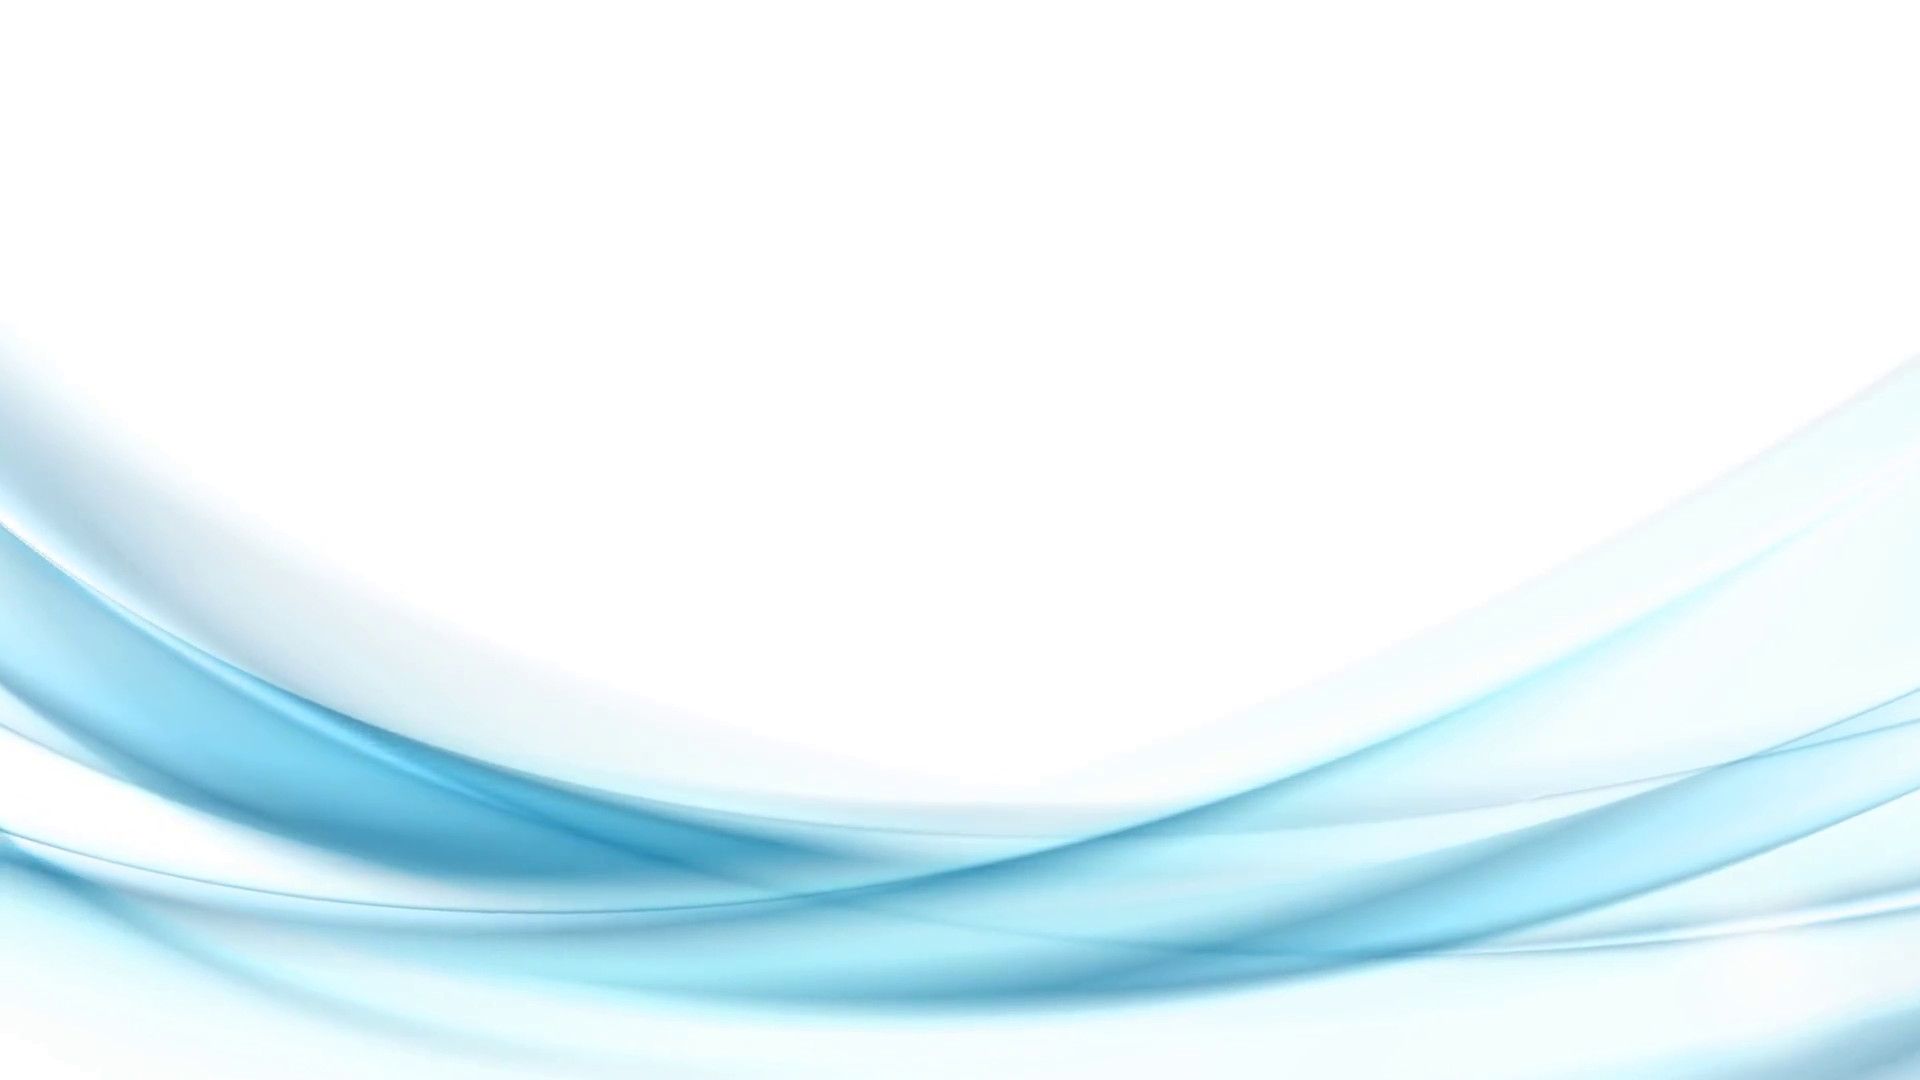 1920x1080 Subscription Library Blue moving flowing abstract waves on white background.  Blurred smooth seamless loop design. Video